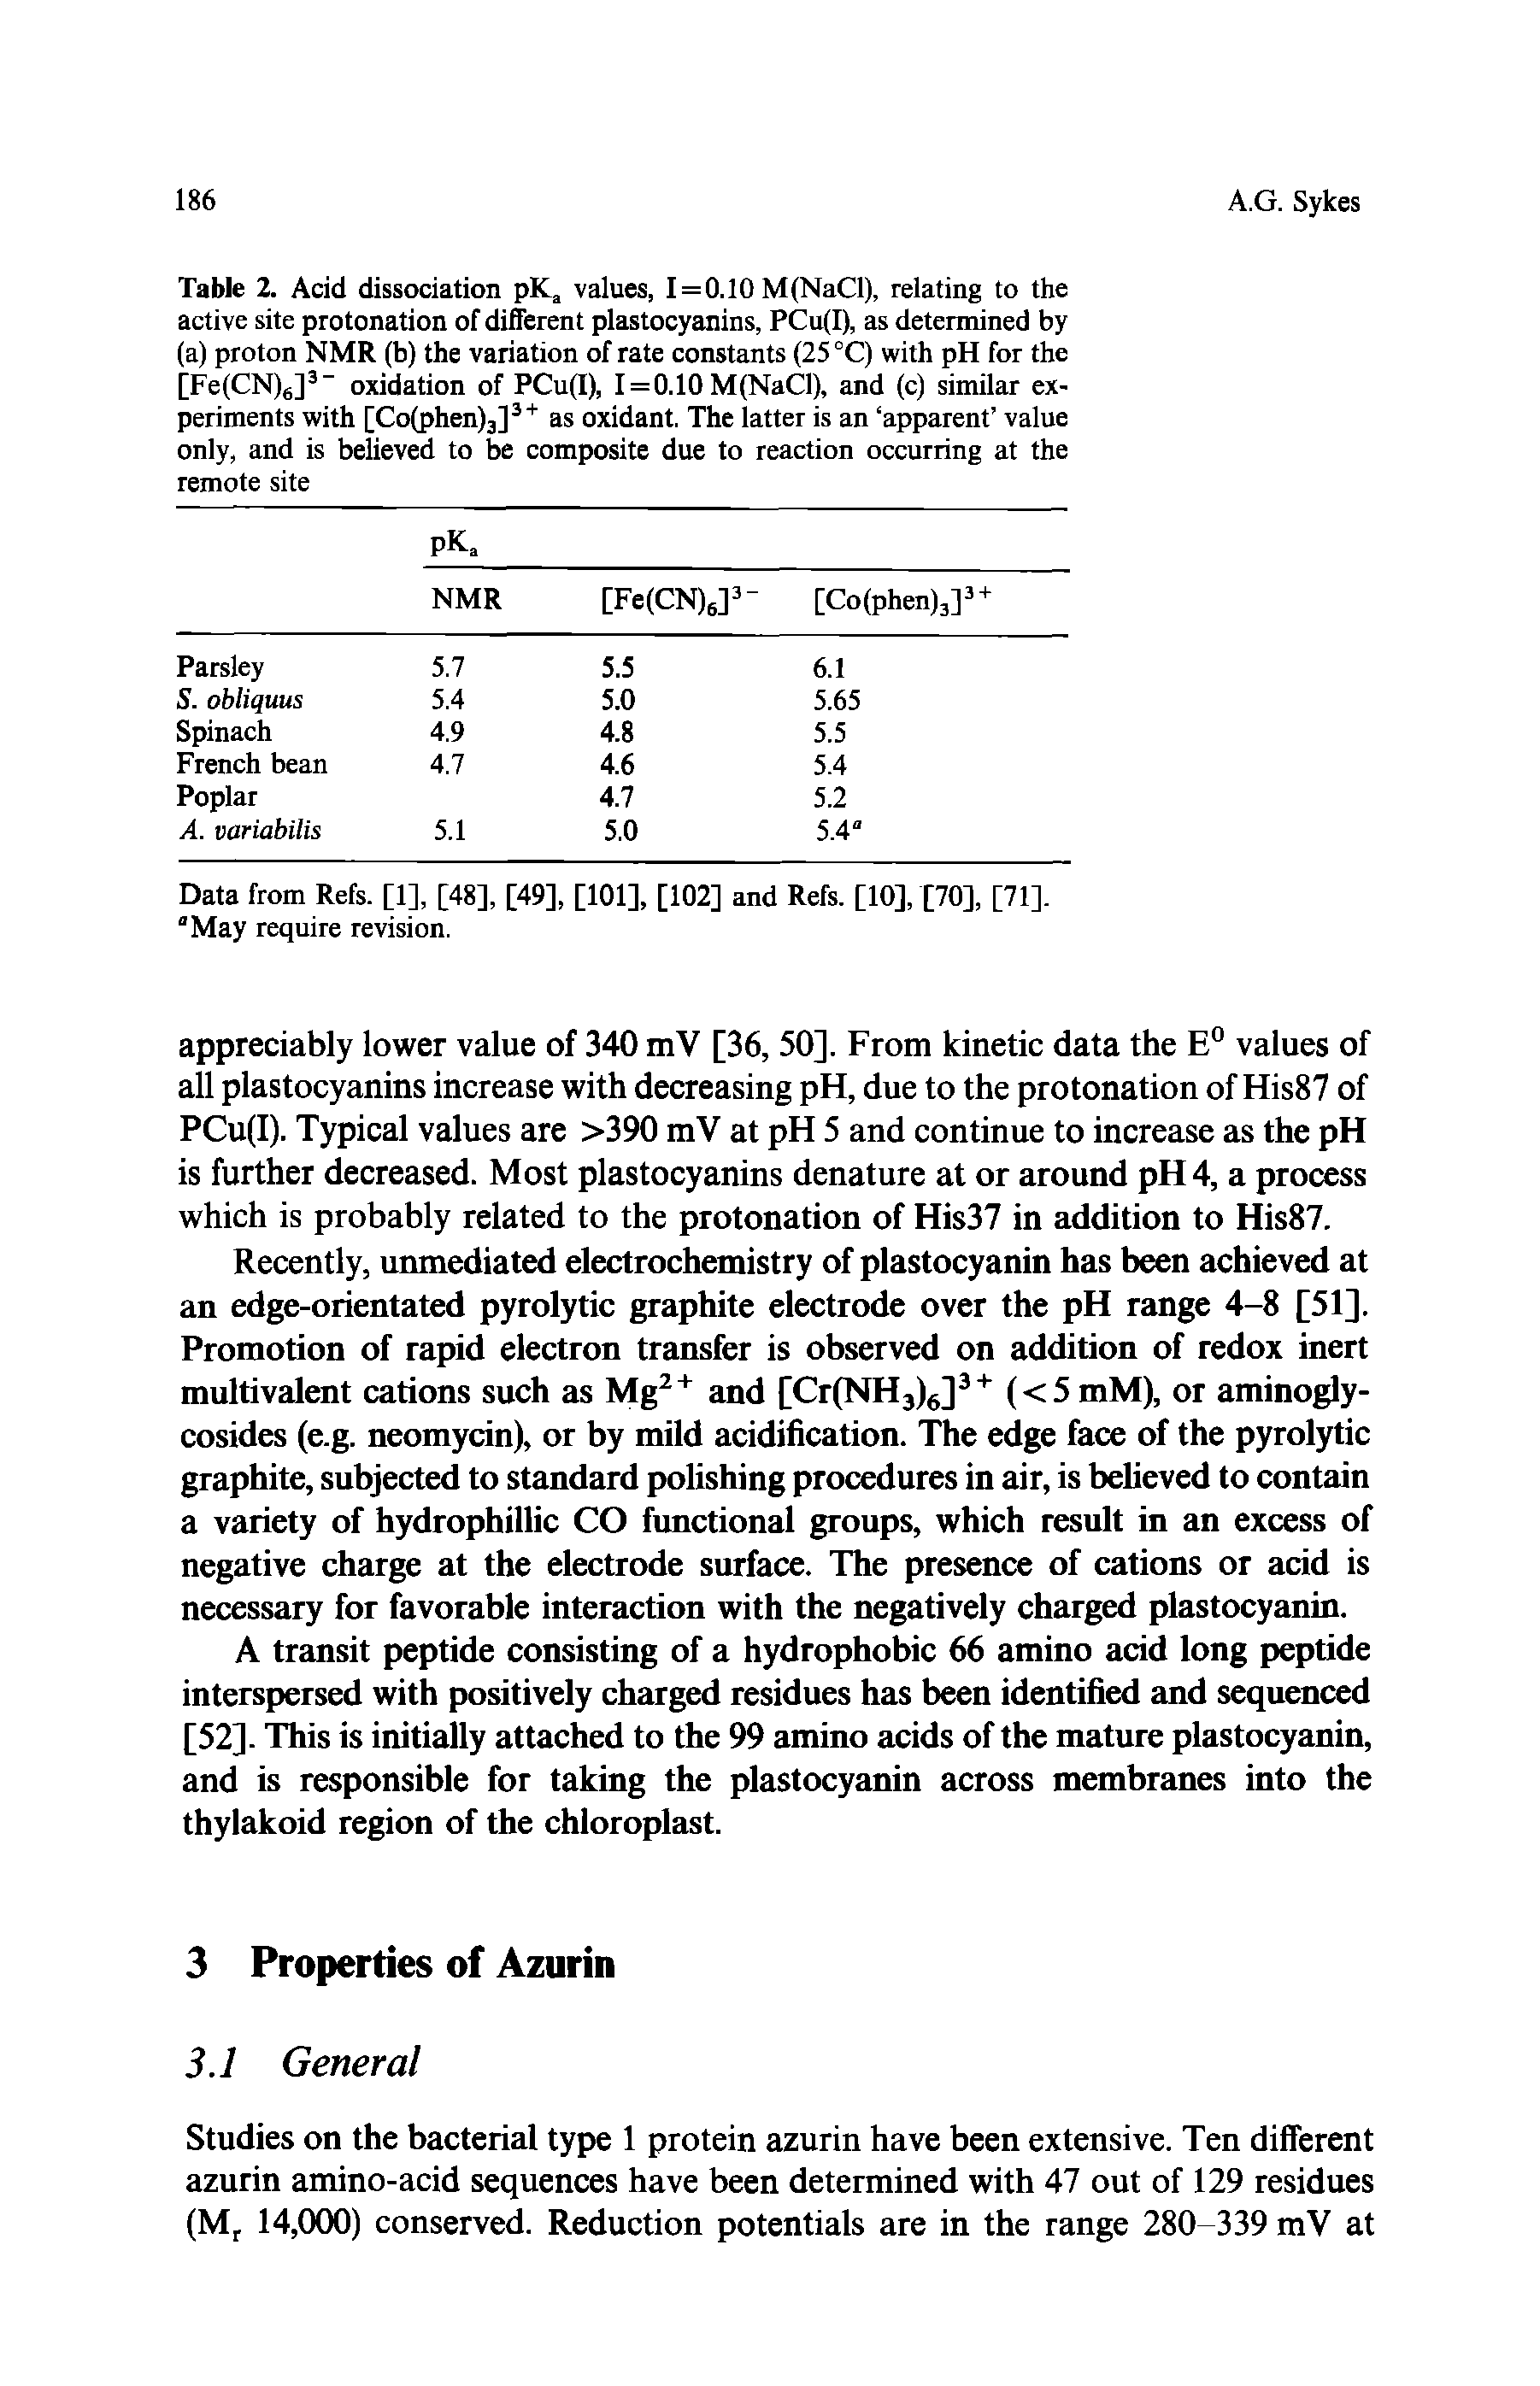 Table 2. Acid dissociation pK values, 1 = 0.10 M(NaCl), relating to the active site protonation of different plastocyanins, PCu(I), as determined by (a) proton NMR (b) the variation of rate constants (25 °C) with pH for the [FelCN) ] oxidation of PCu(I), 1 = 0.10 M(NaCl), and (c) similar experiments with [Co(phen)3] " as oxidant. The latter is an apparent value only, and is believed to be composite due to reaction occurring at the remote site...